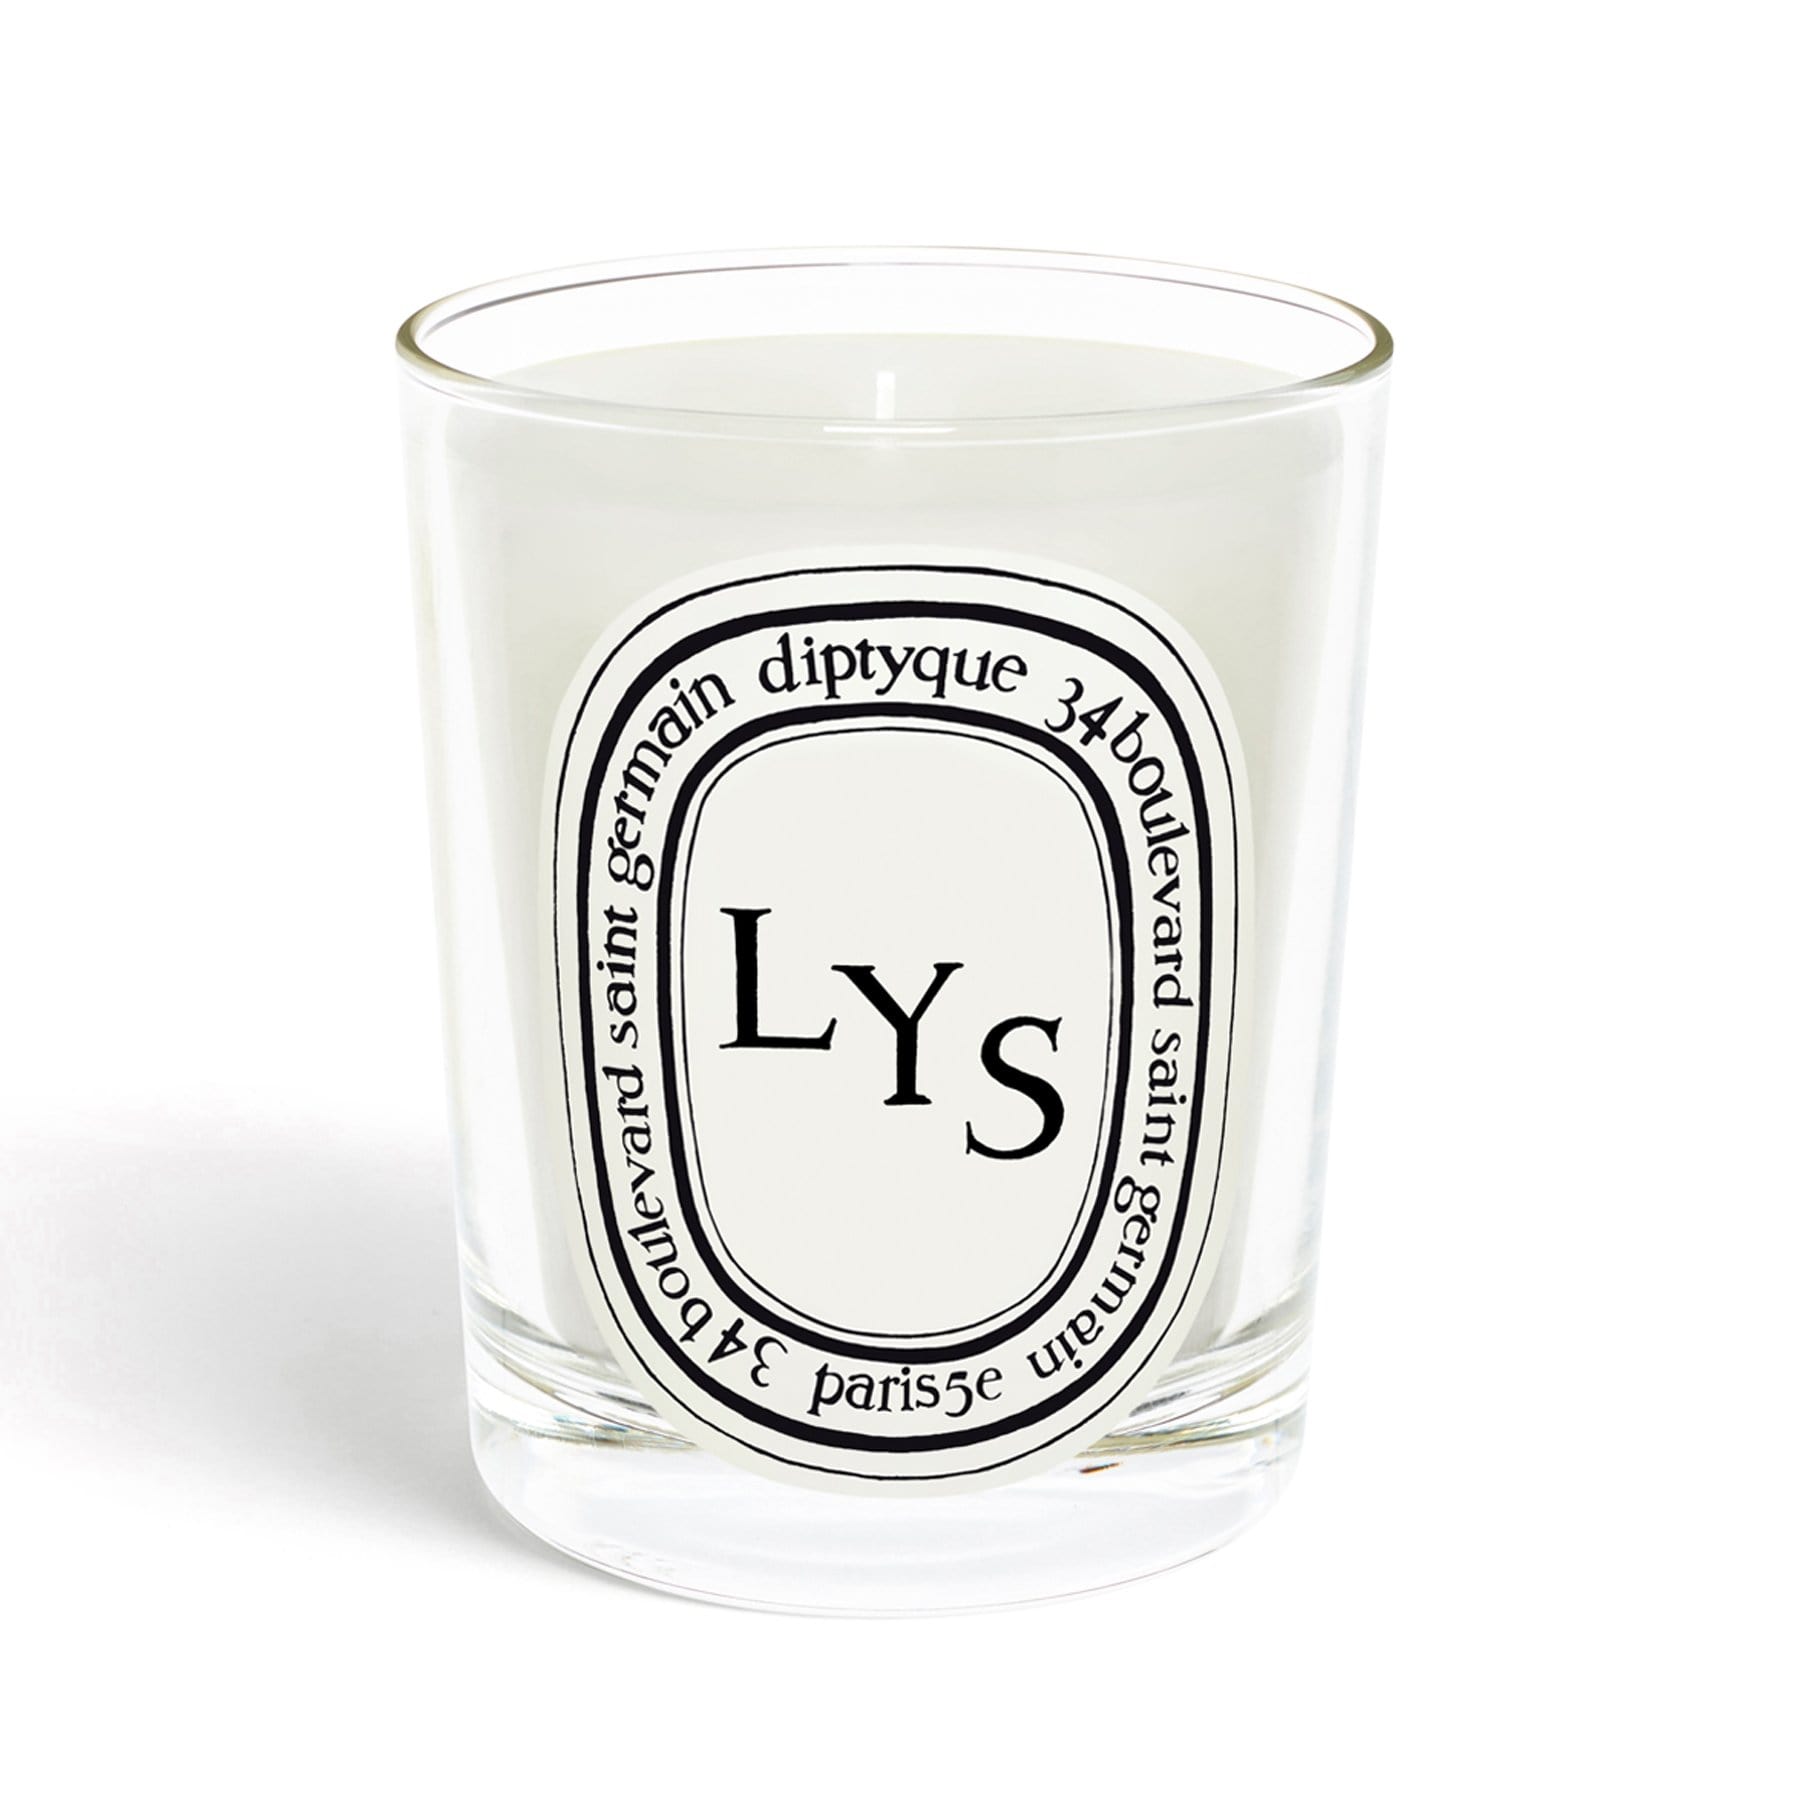 Lys Diptyque Scented Candle